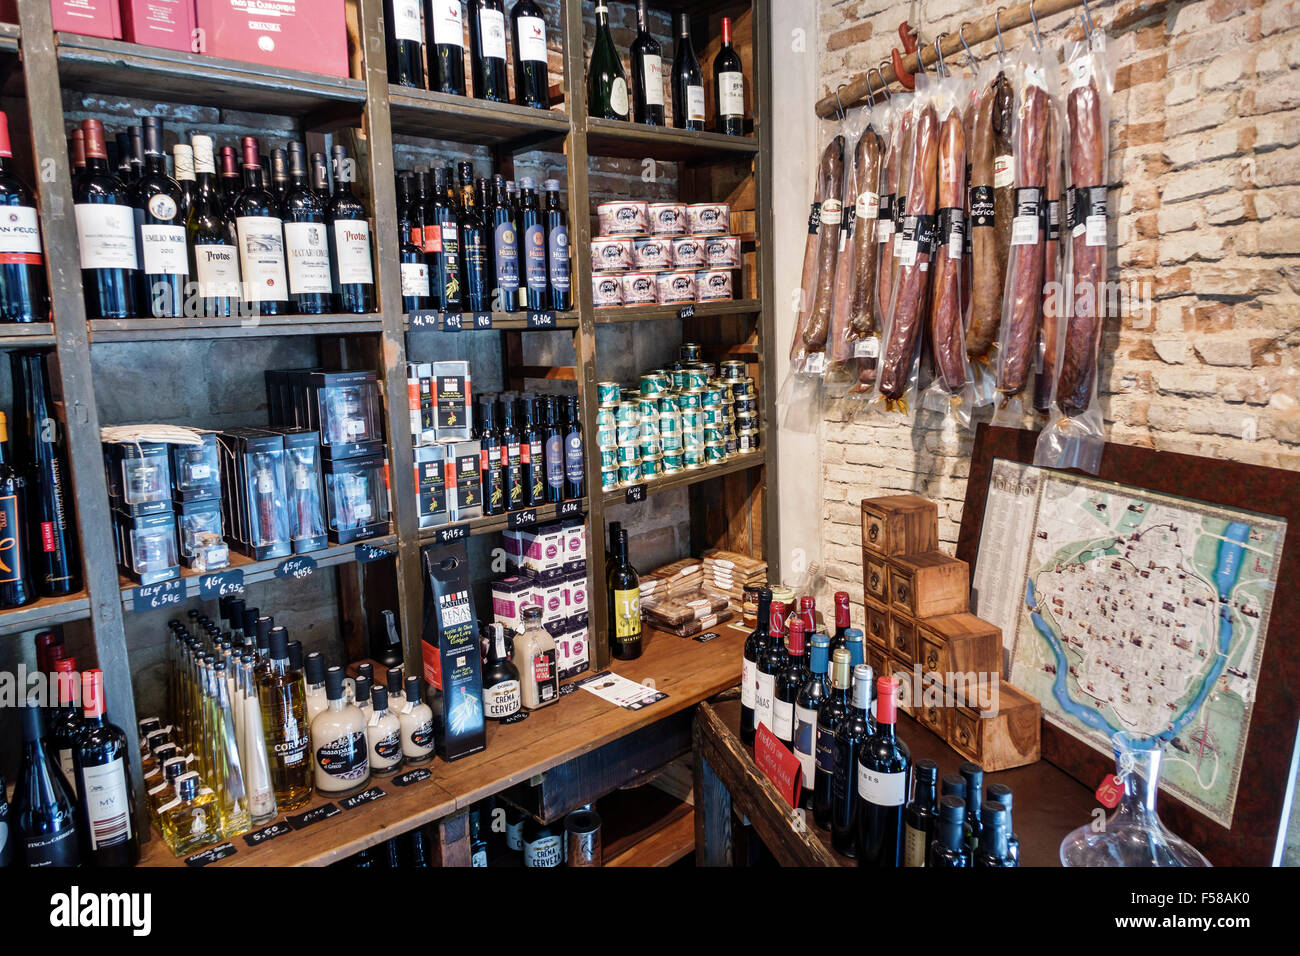 Toledo Spain,Spanish,historic center,Grequissimo Jamon & Company,deli,gourmet shop,specialty groceries,shopping shoppers shop shops market buying sell Stock Photo